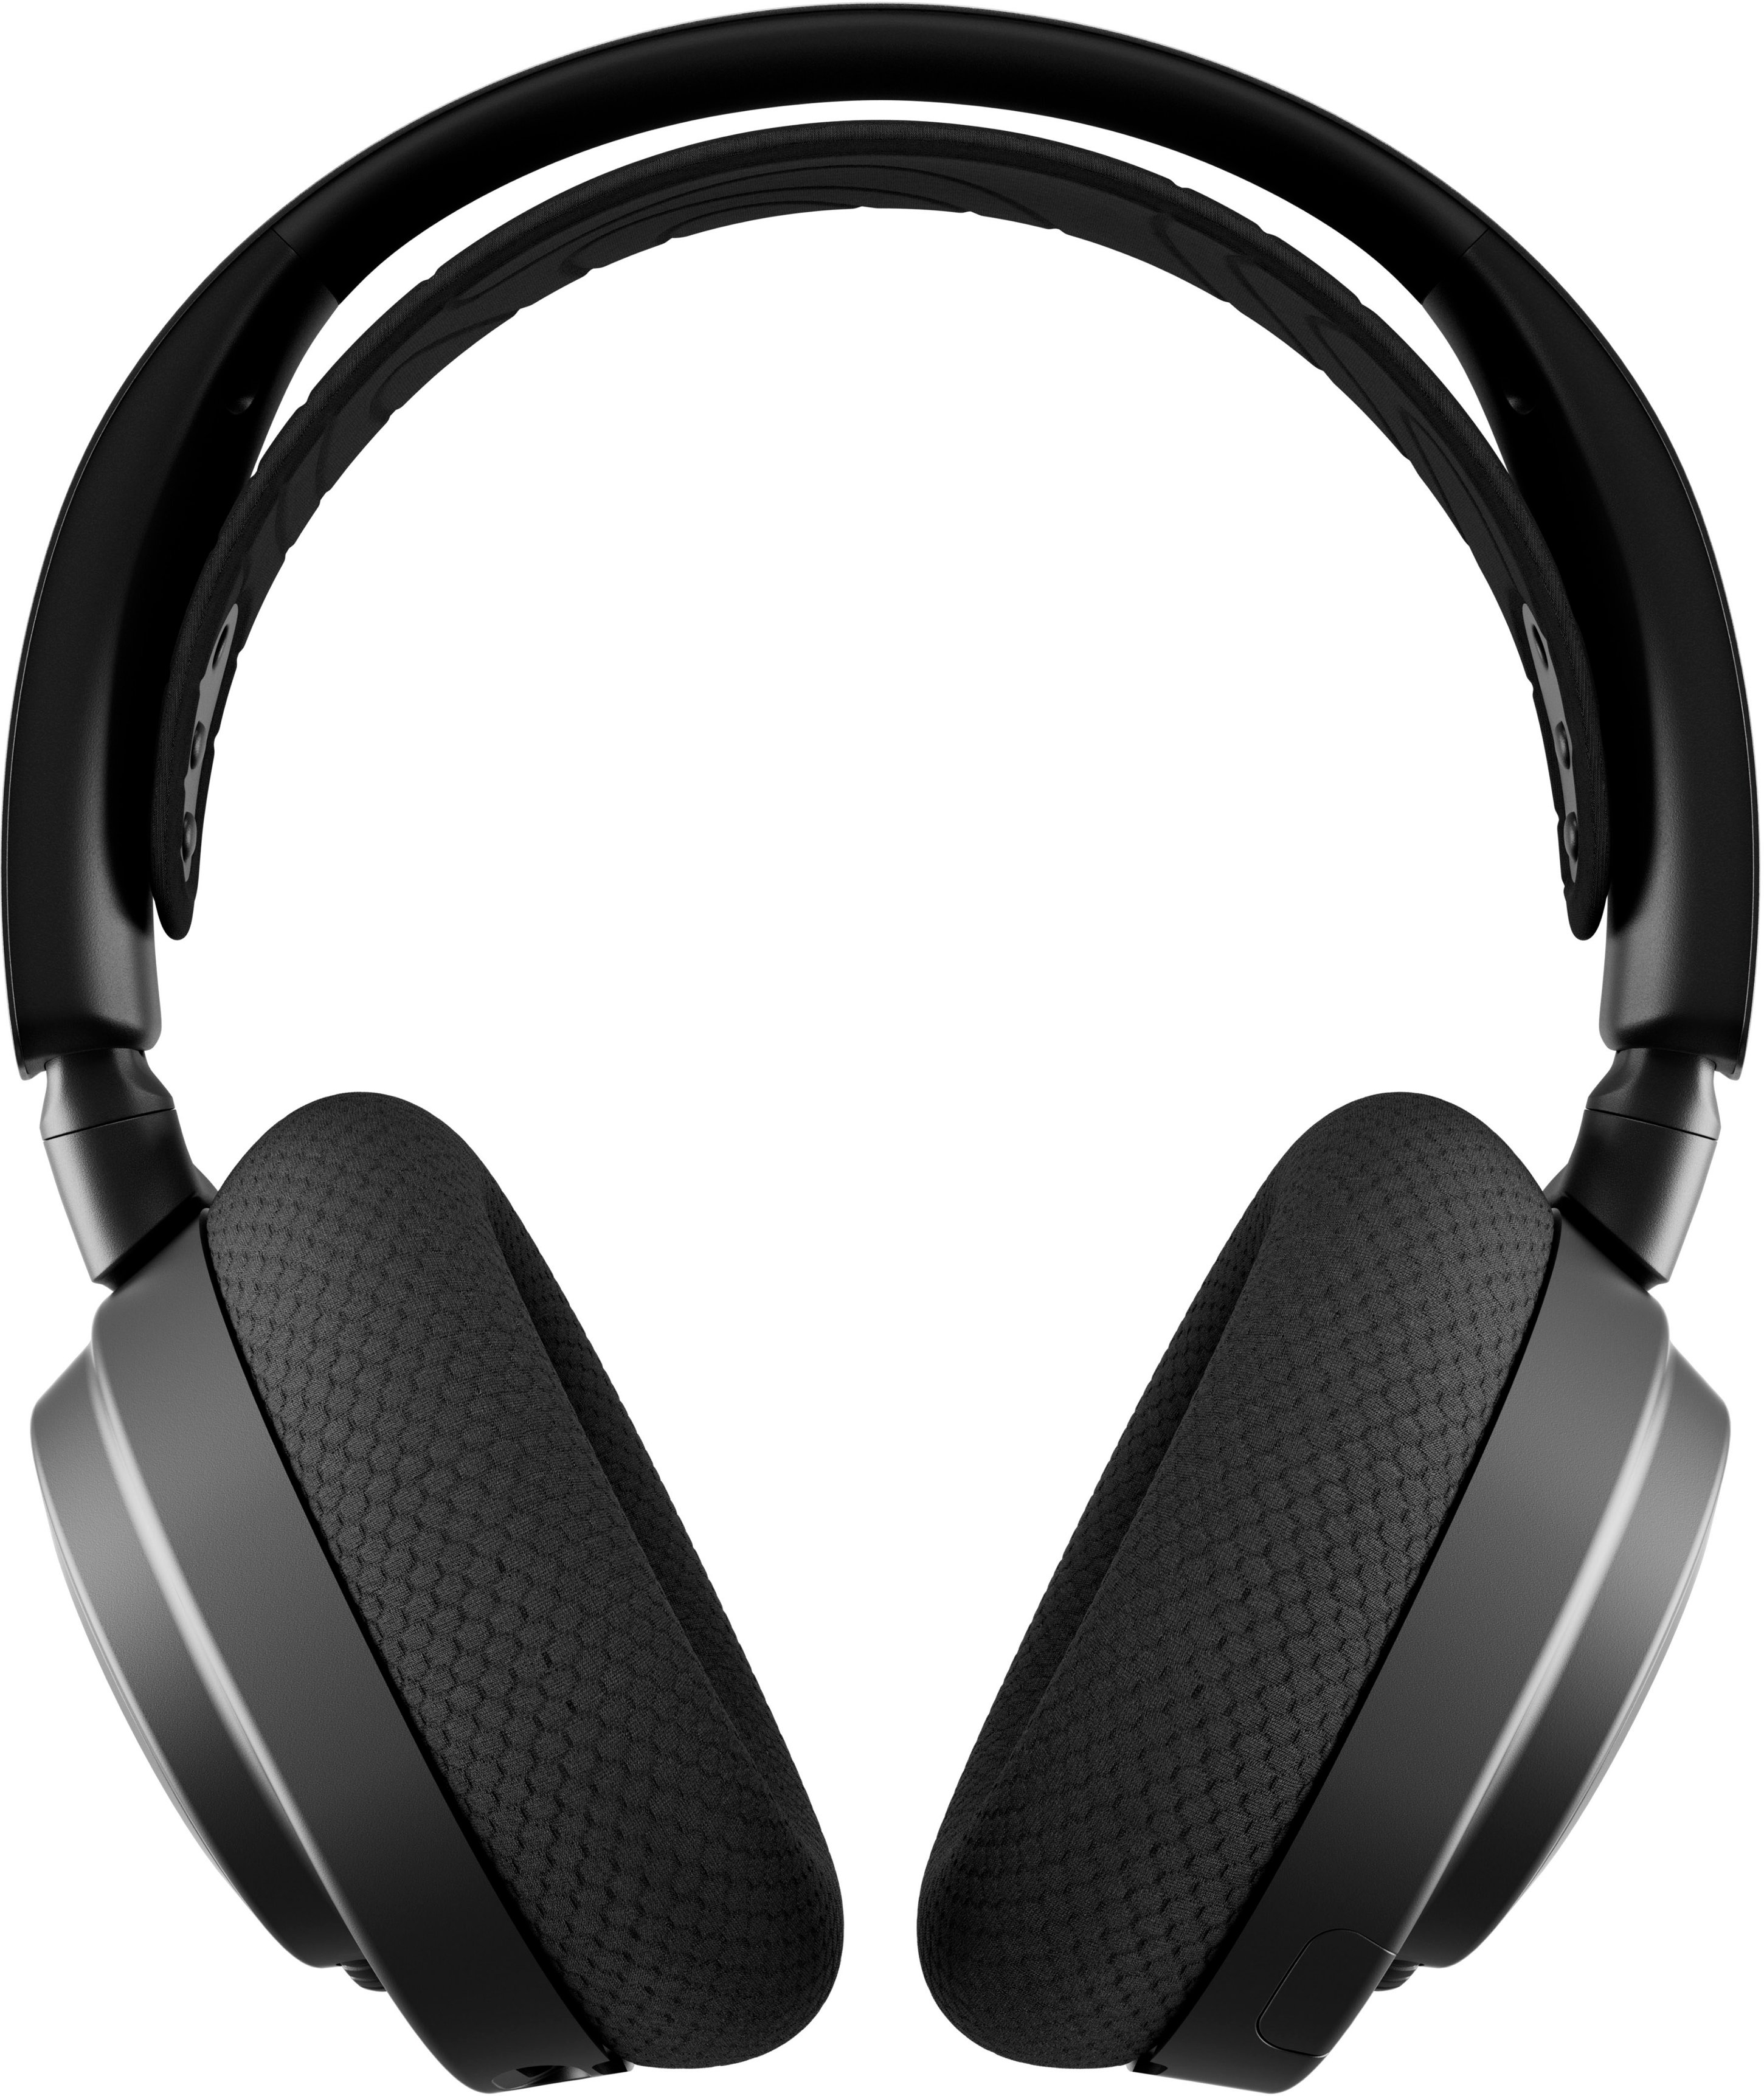 Angle View: SteelSeries - Arctis Nova 7 Wireless Gaming Headset for PC - Black